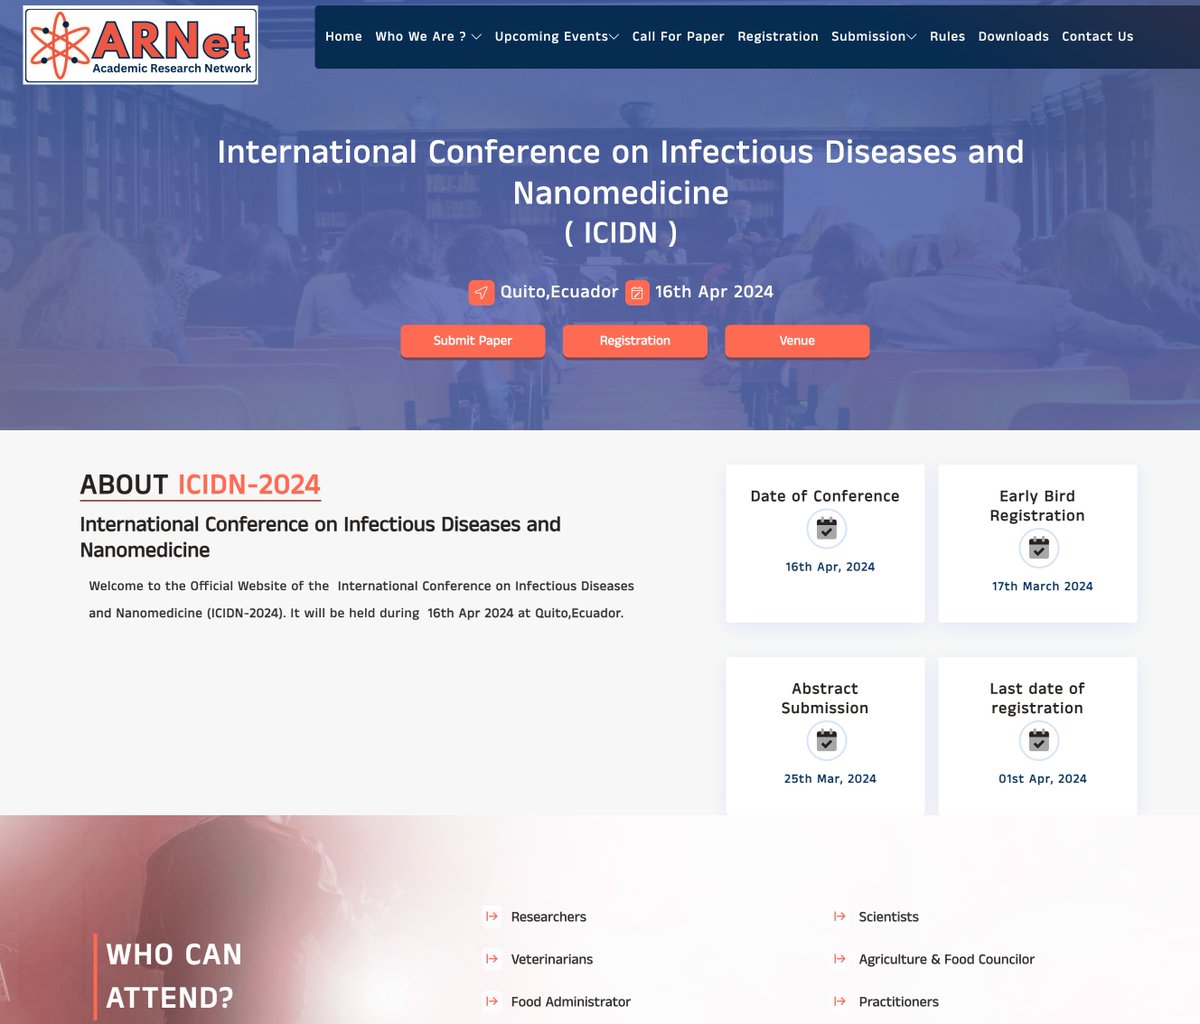 So apparently, this is kicking off today.

International Conference on Infectious Diseases and Nanomedicine

academicresearchnetwork.com/Conference/56/…